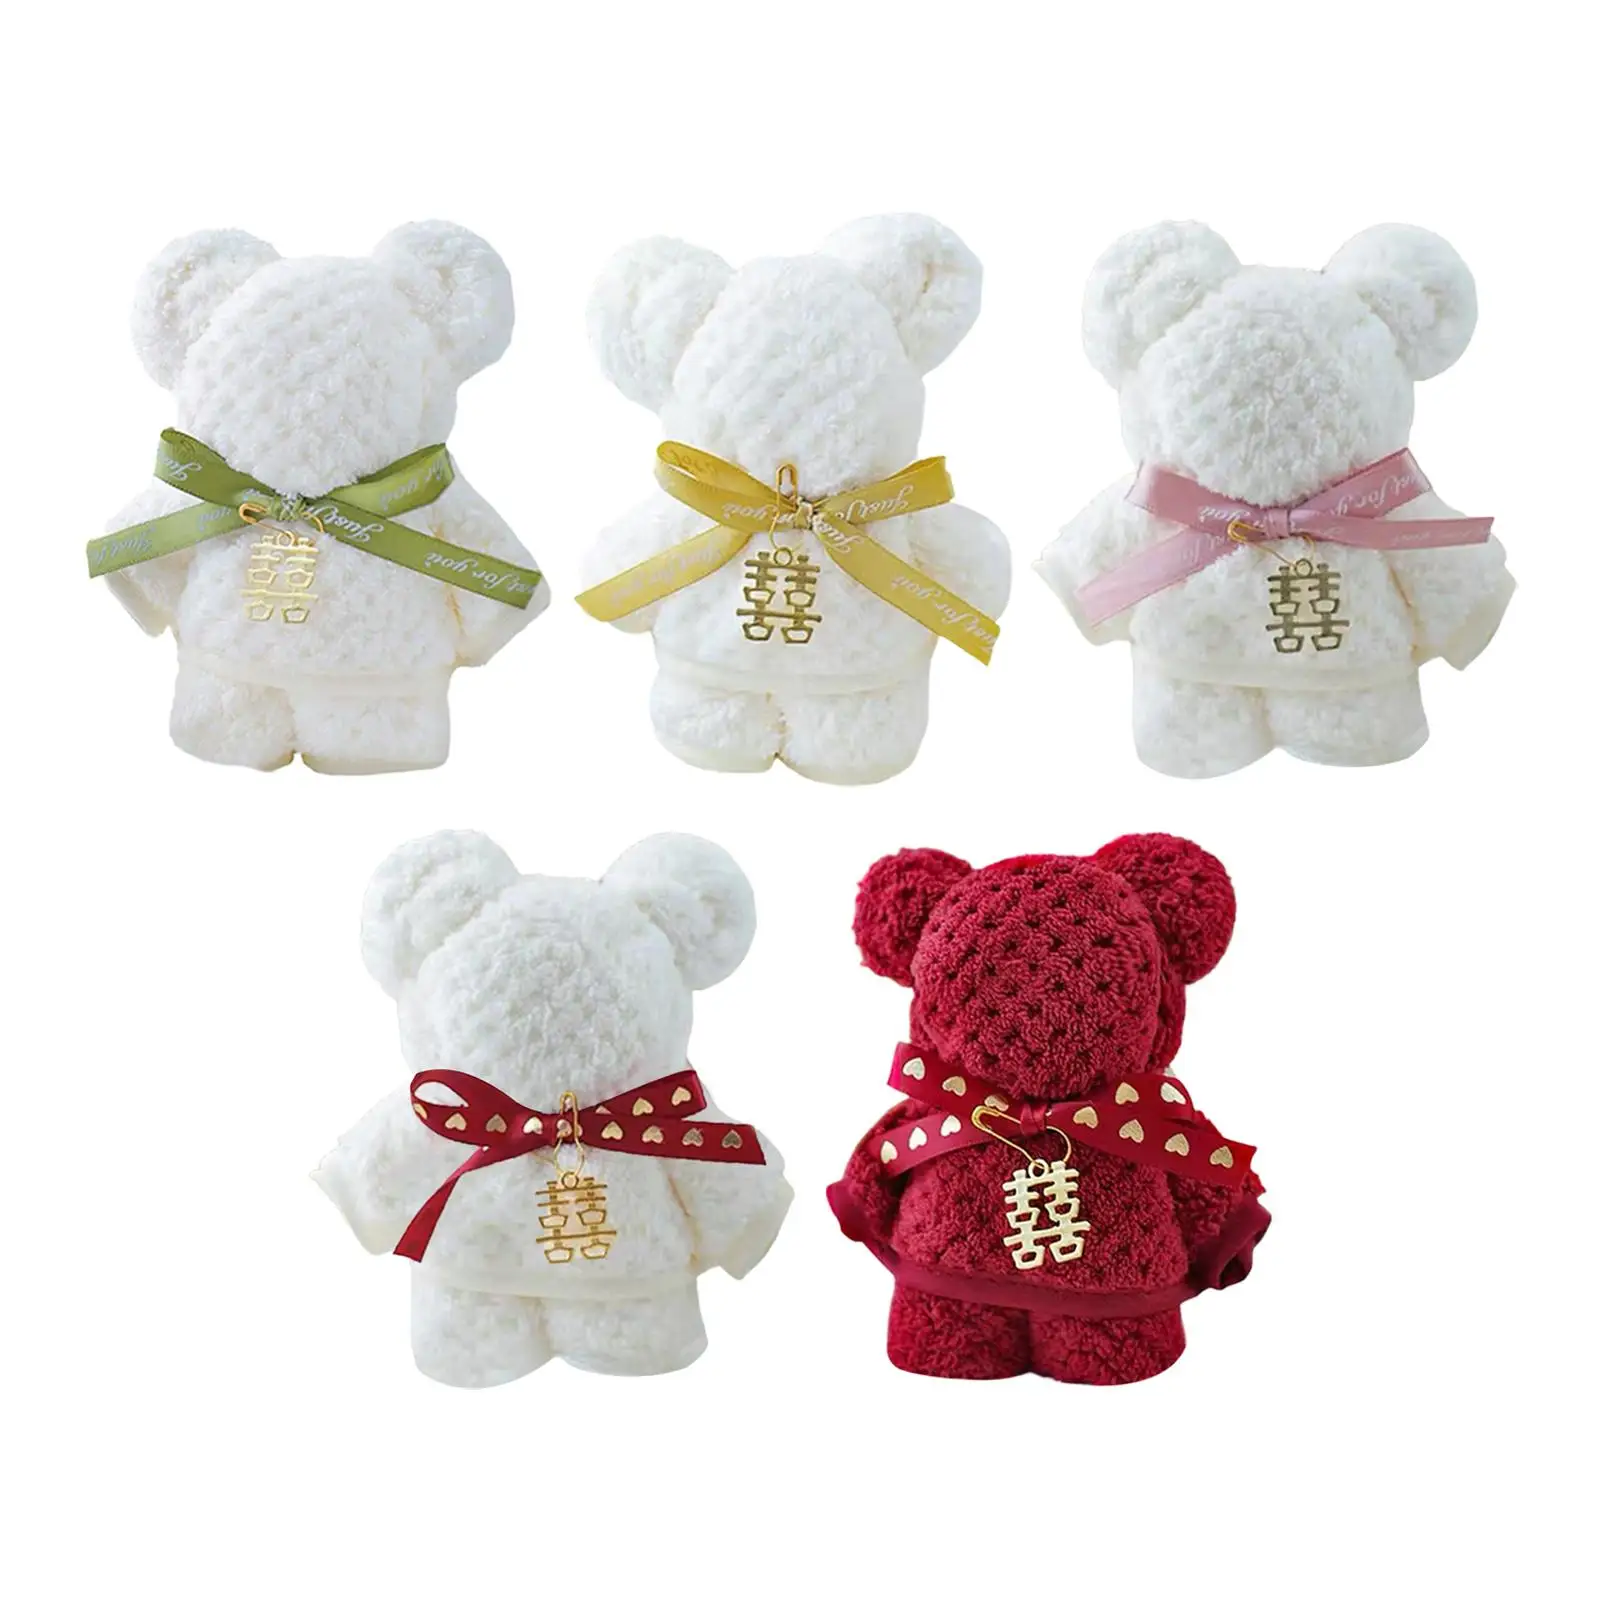 Bear Shaped Towels, Kitchen Household Towels, Cute Quick-drying Animal Bear